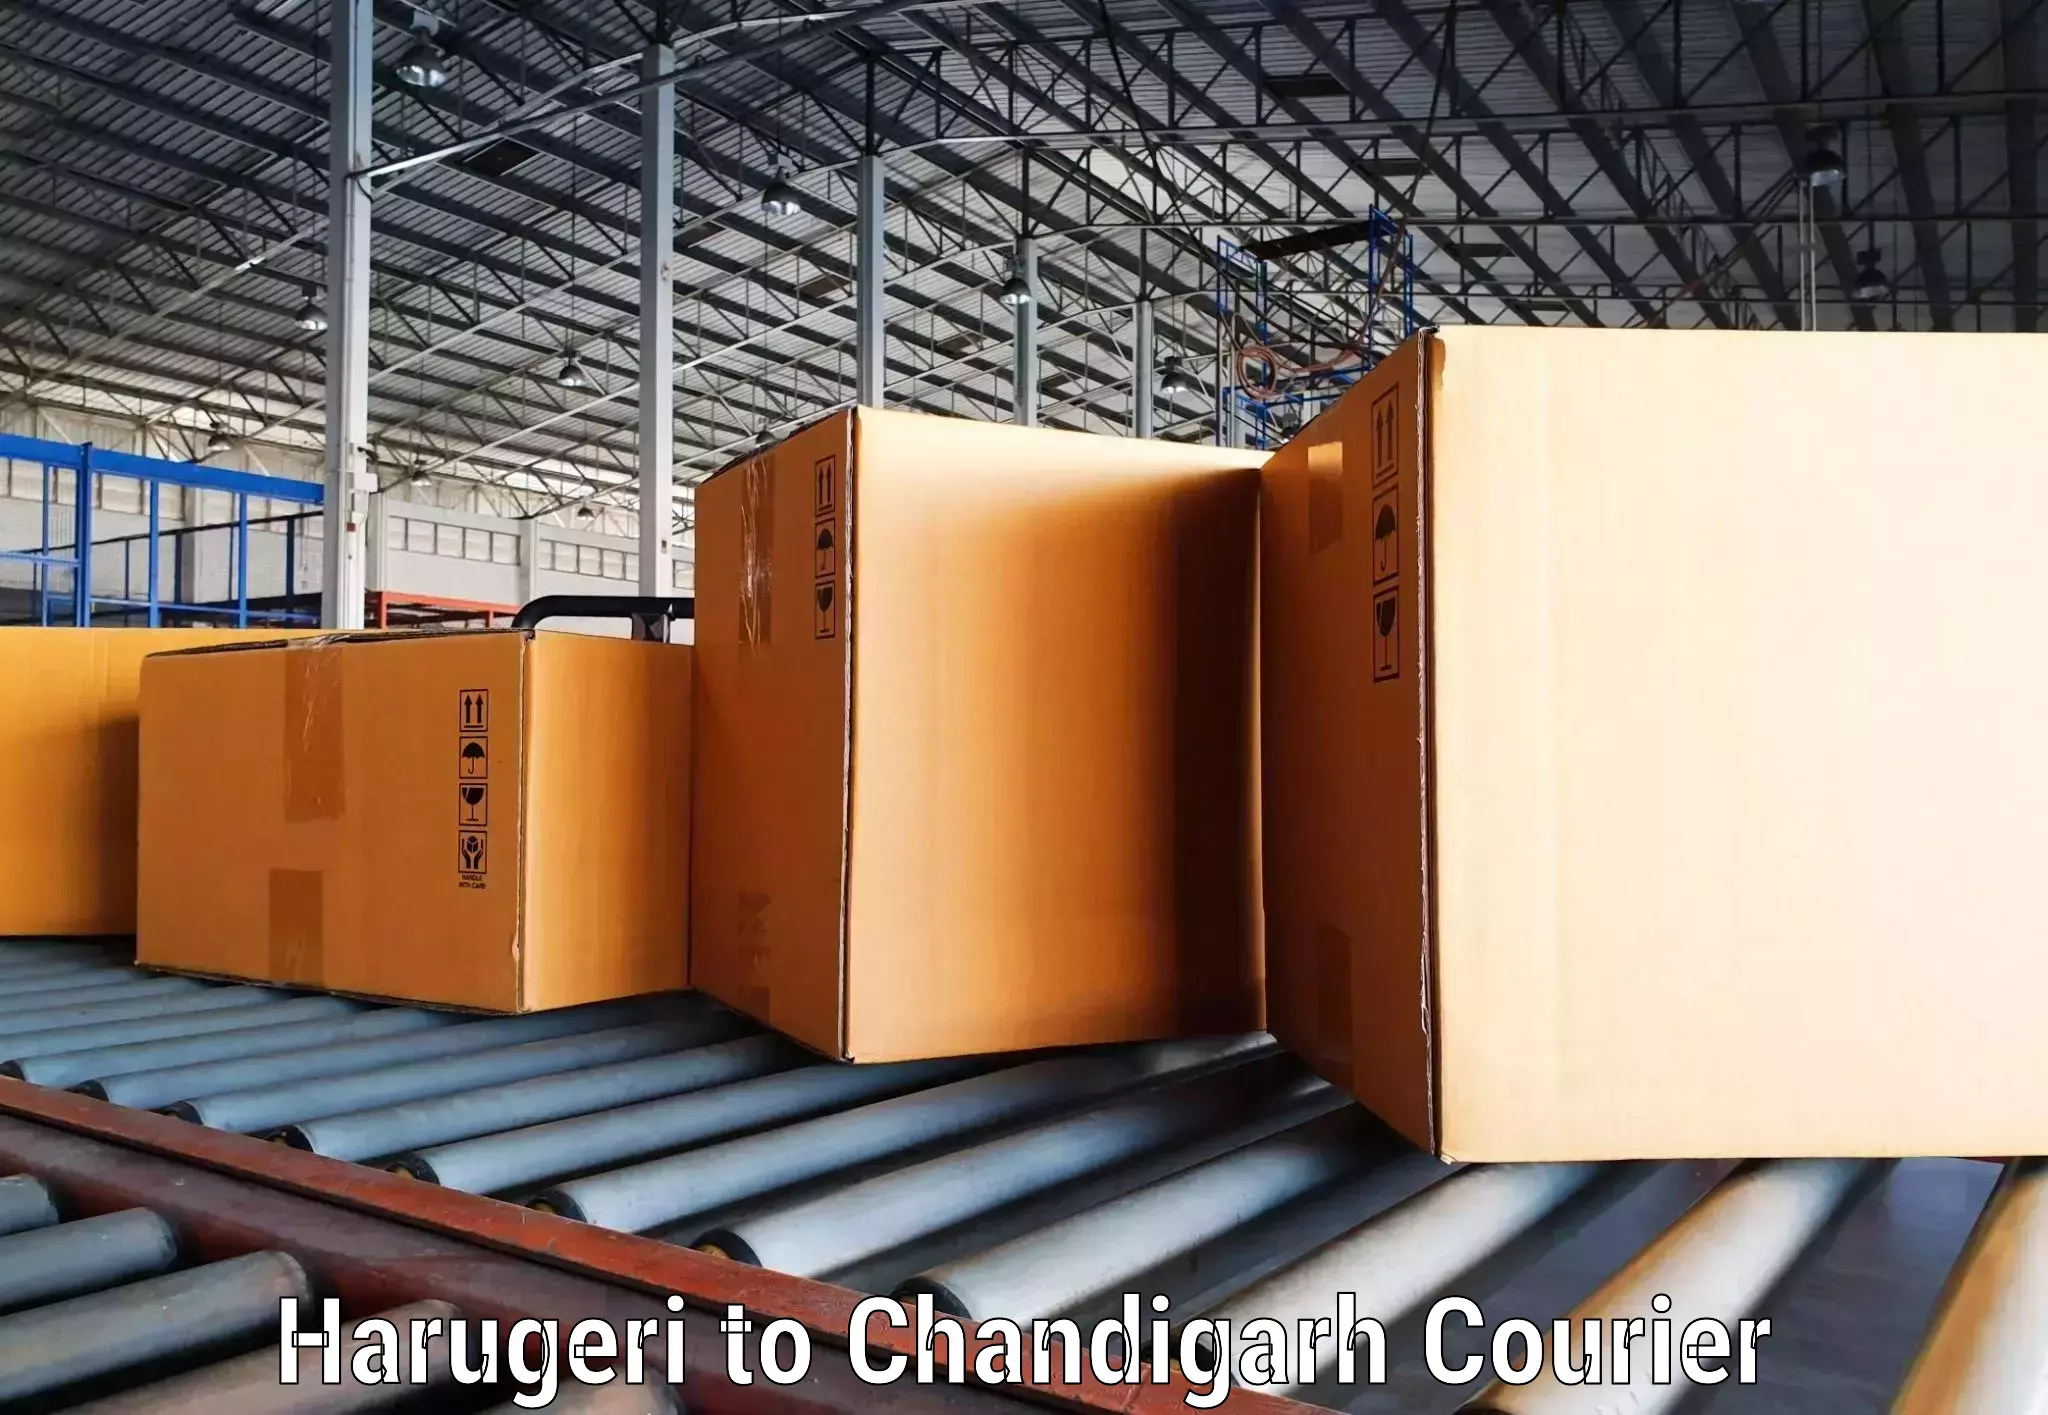 Easy access courier services Harugeri to Chandigarh